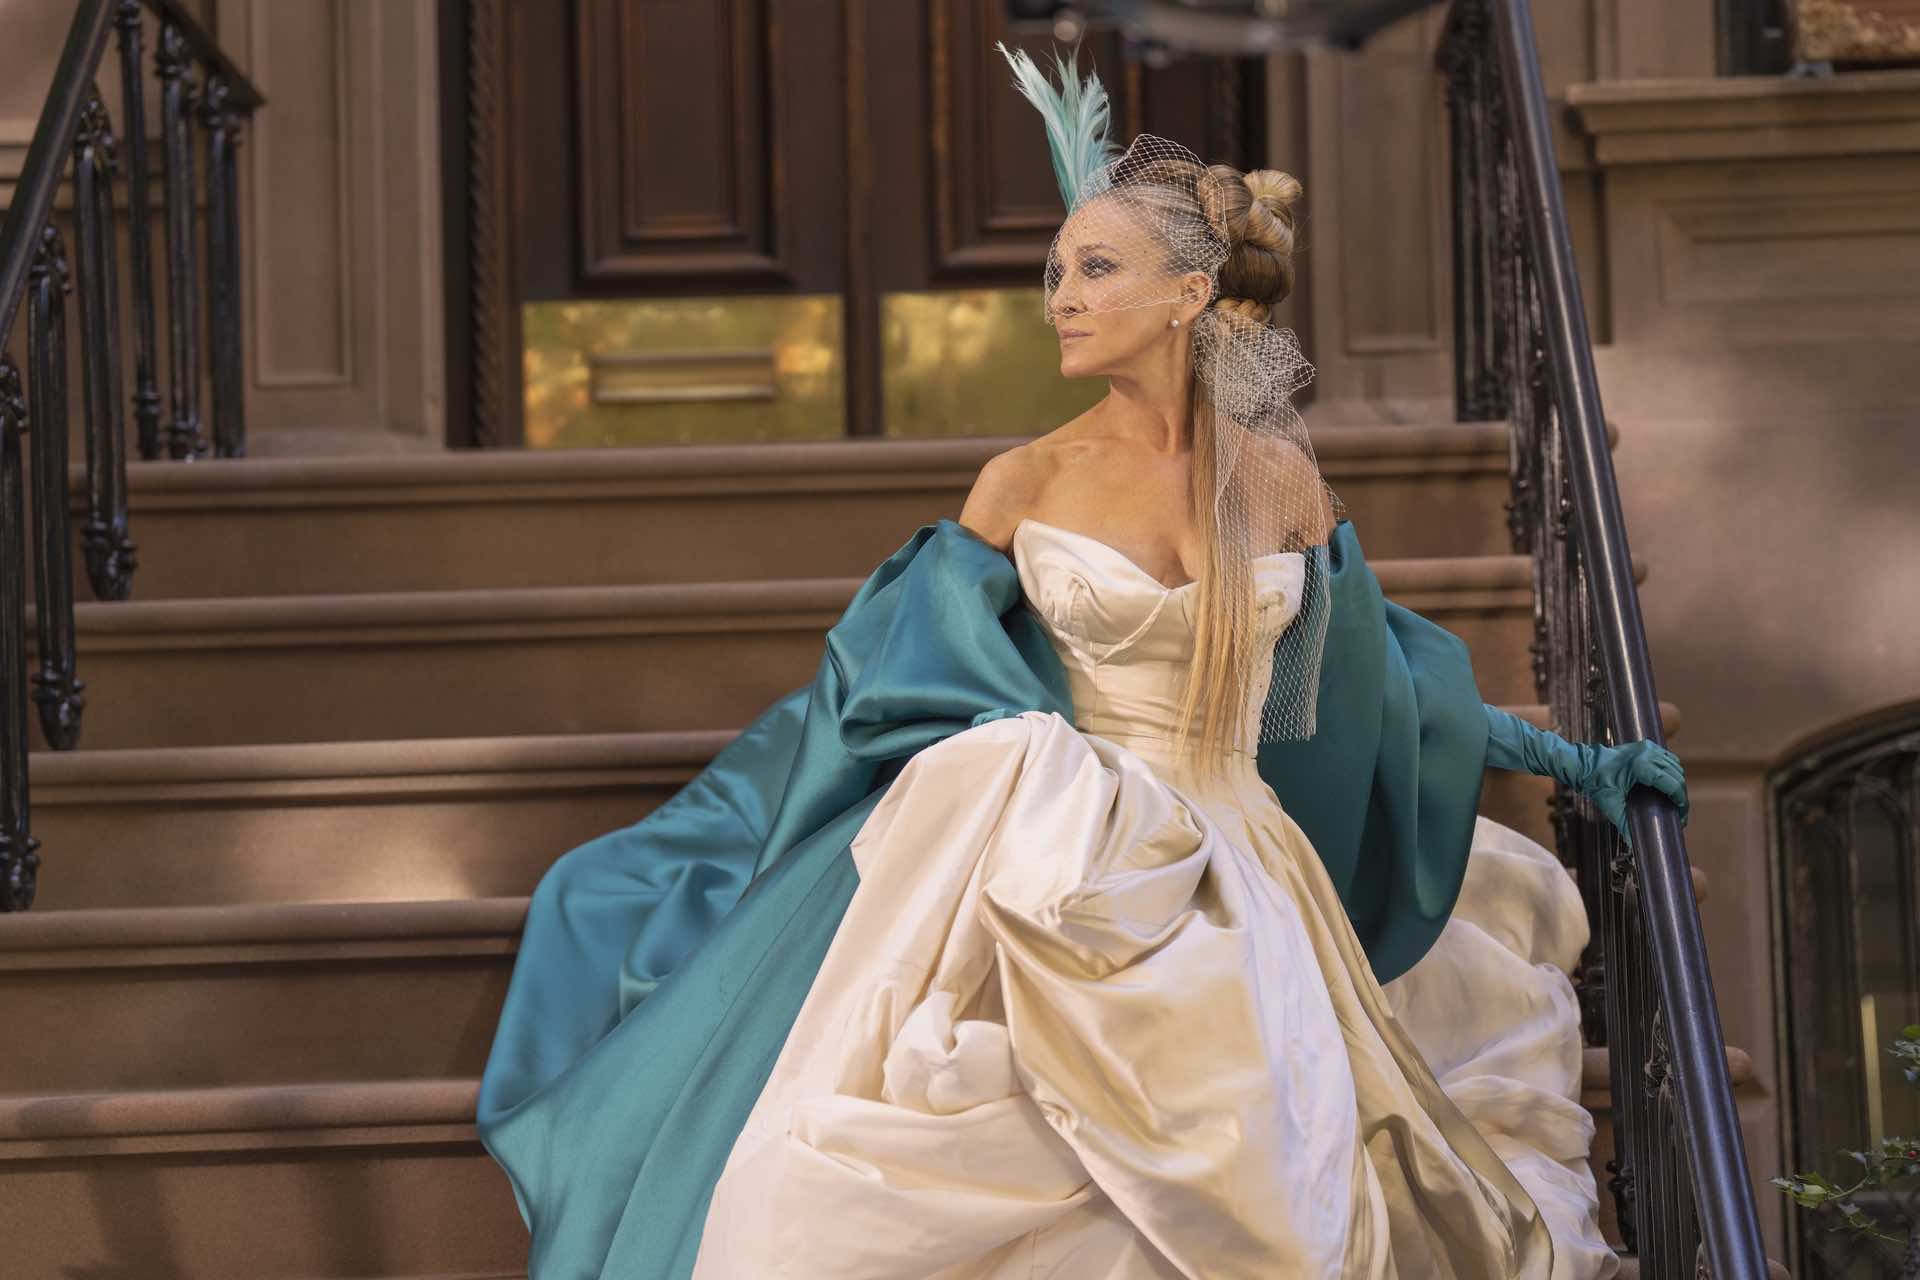 Sarah Jessica Parker as Carrie Bradshaw getting married in a Vivienne Westwood gown in Sex and the City